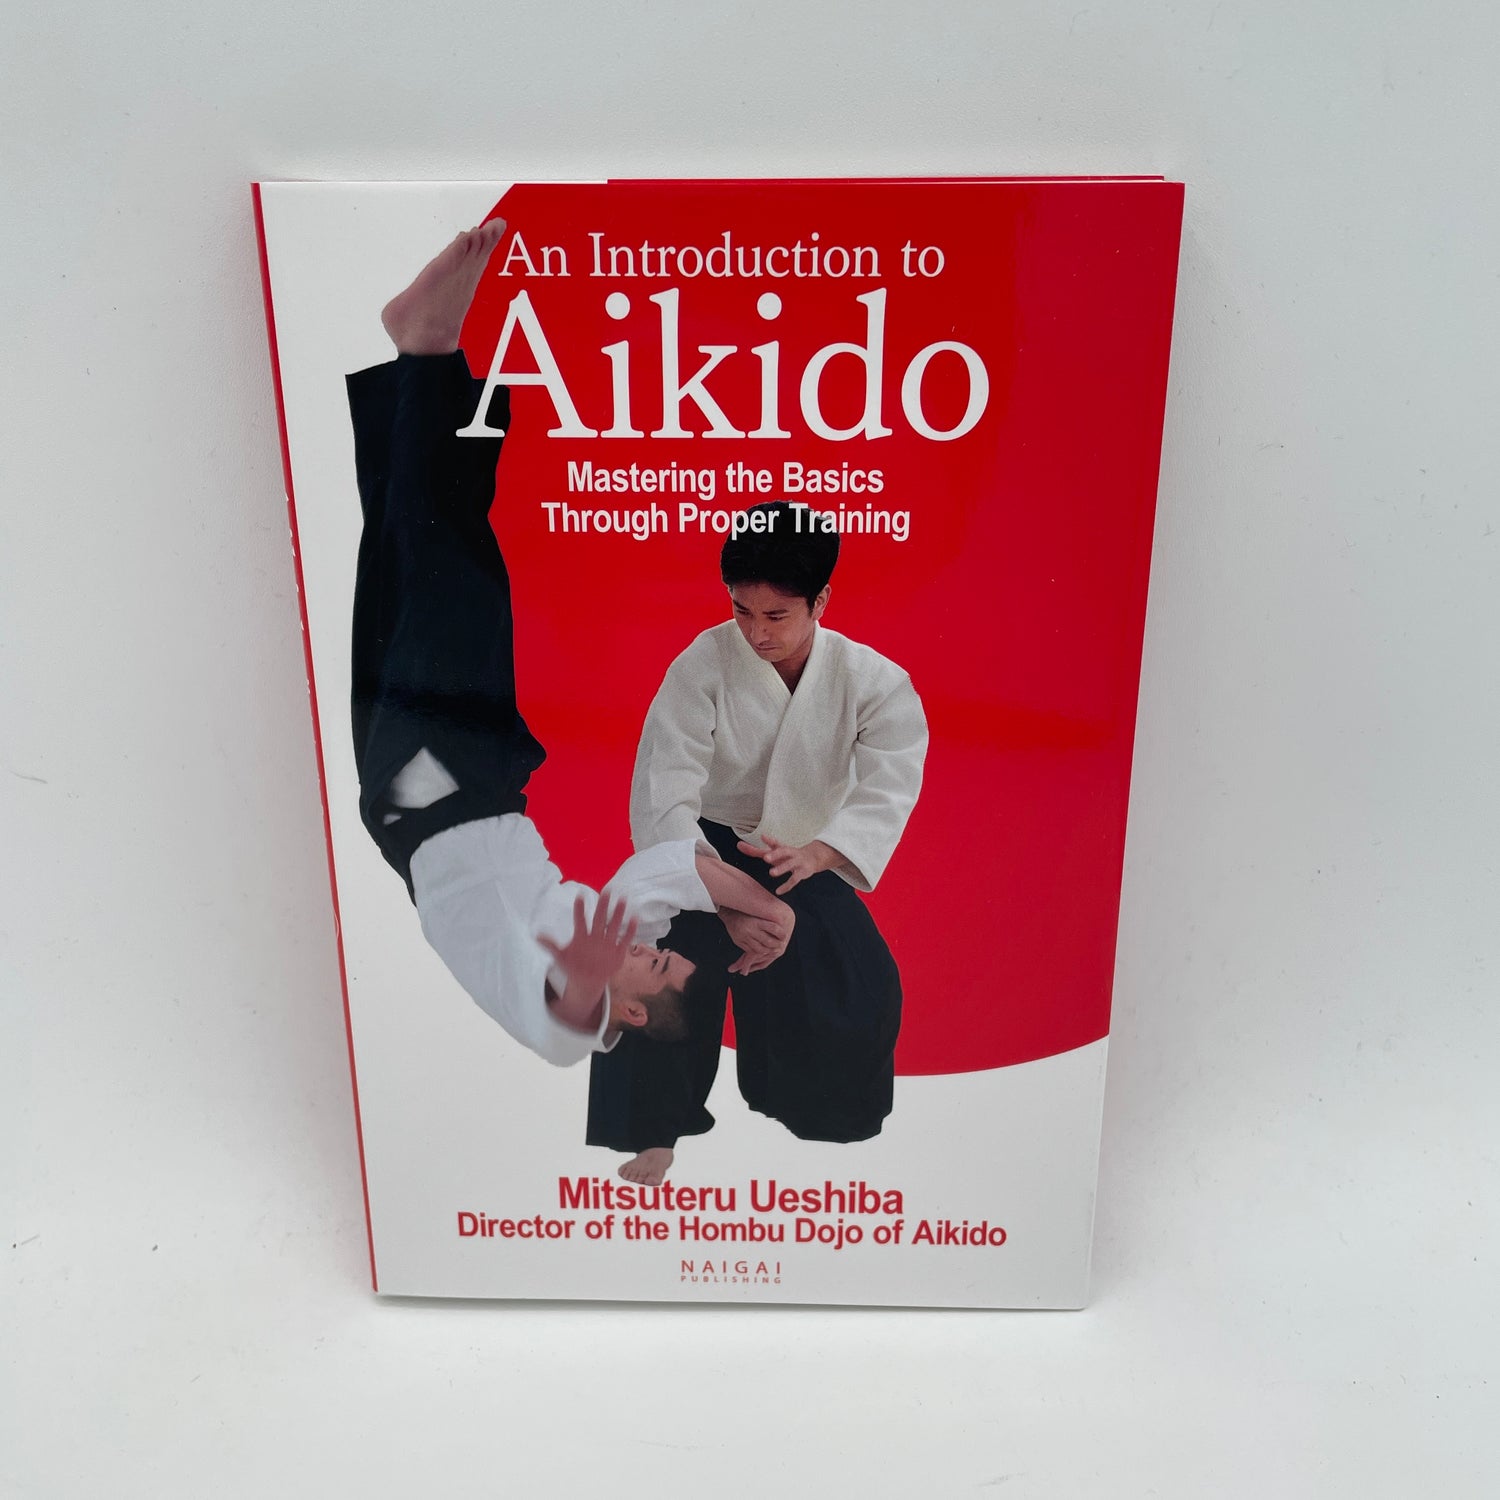 An Introduction to Aikido Mastering the Basics Through Proper Training Book by Mitsuteru Ueshiba (Preowned)